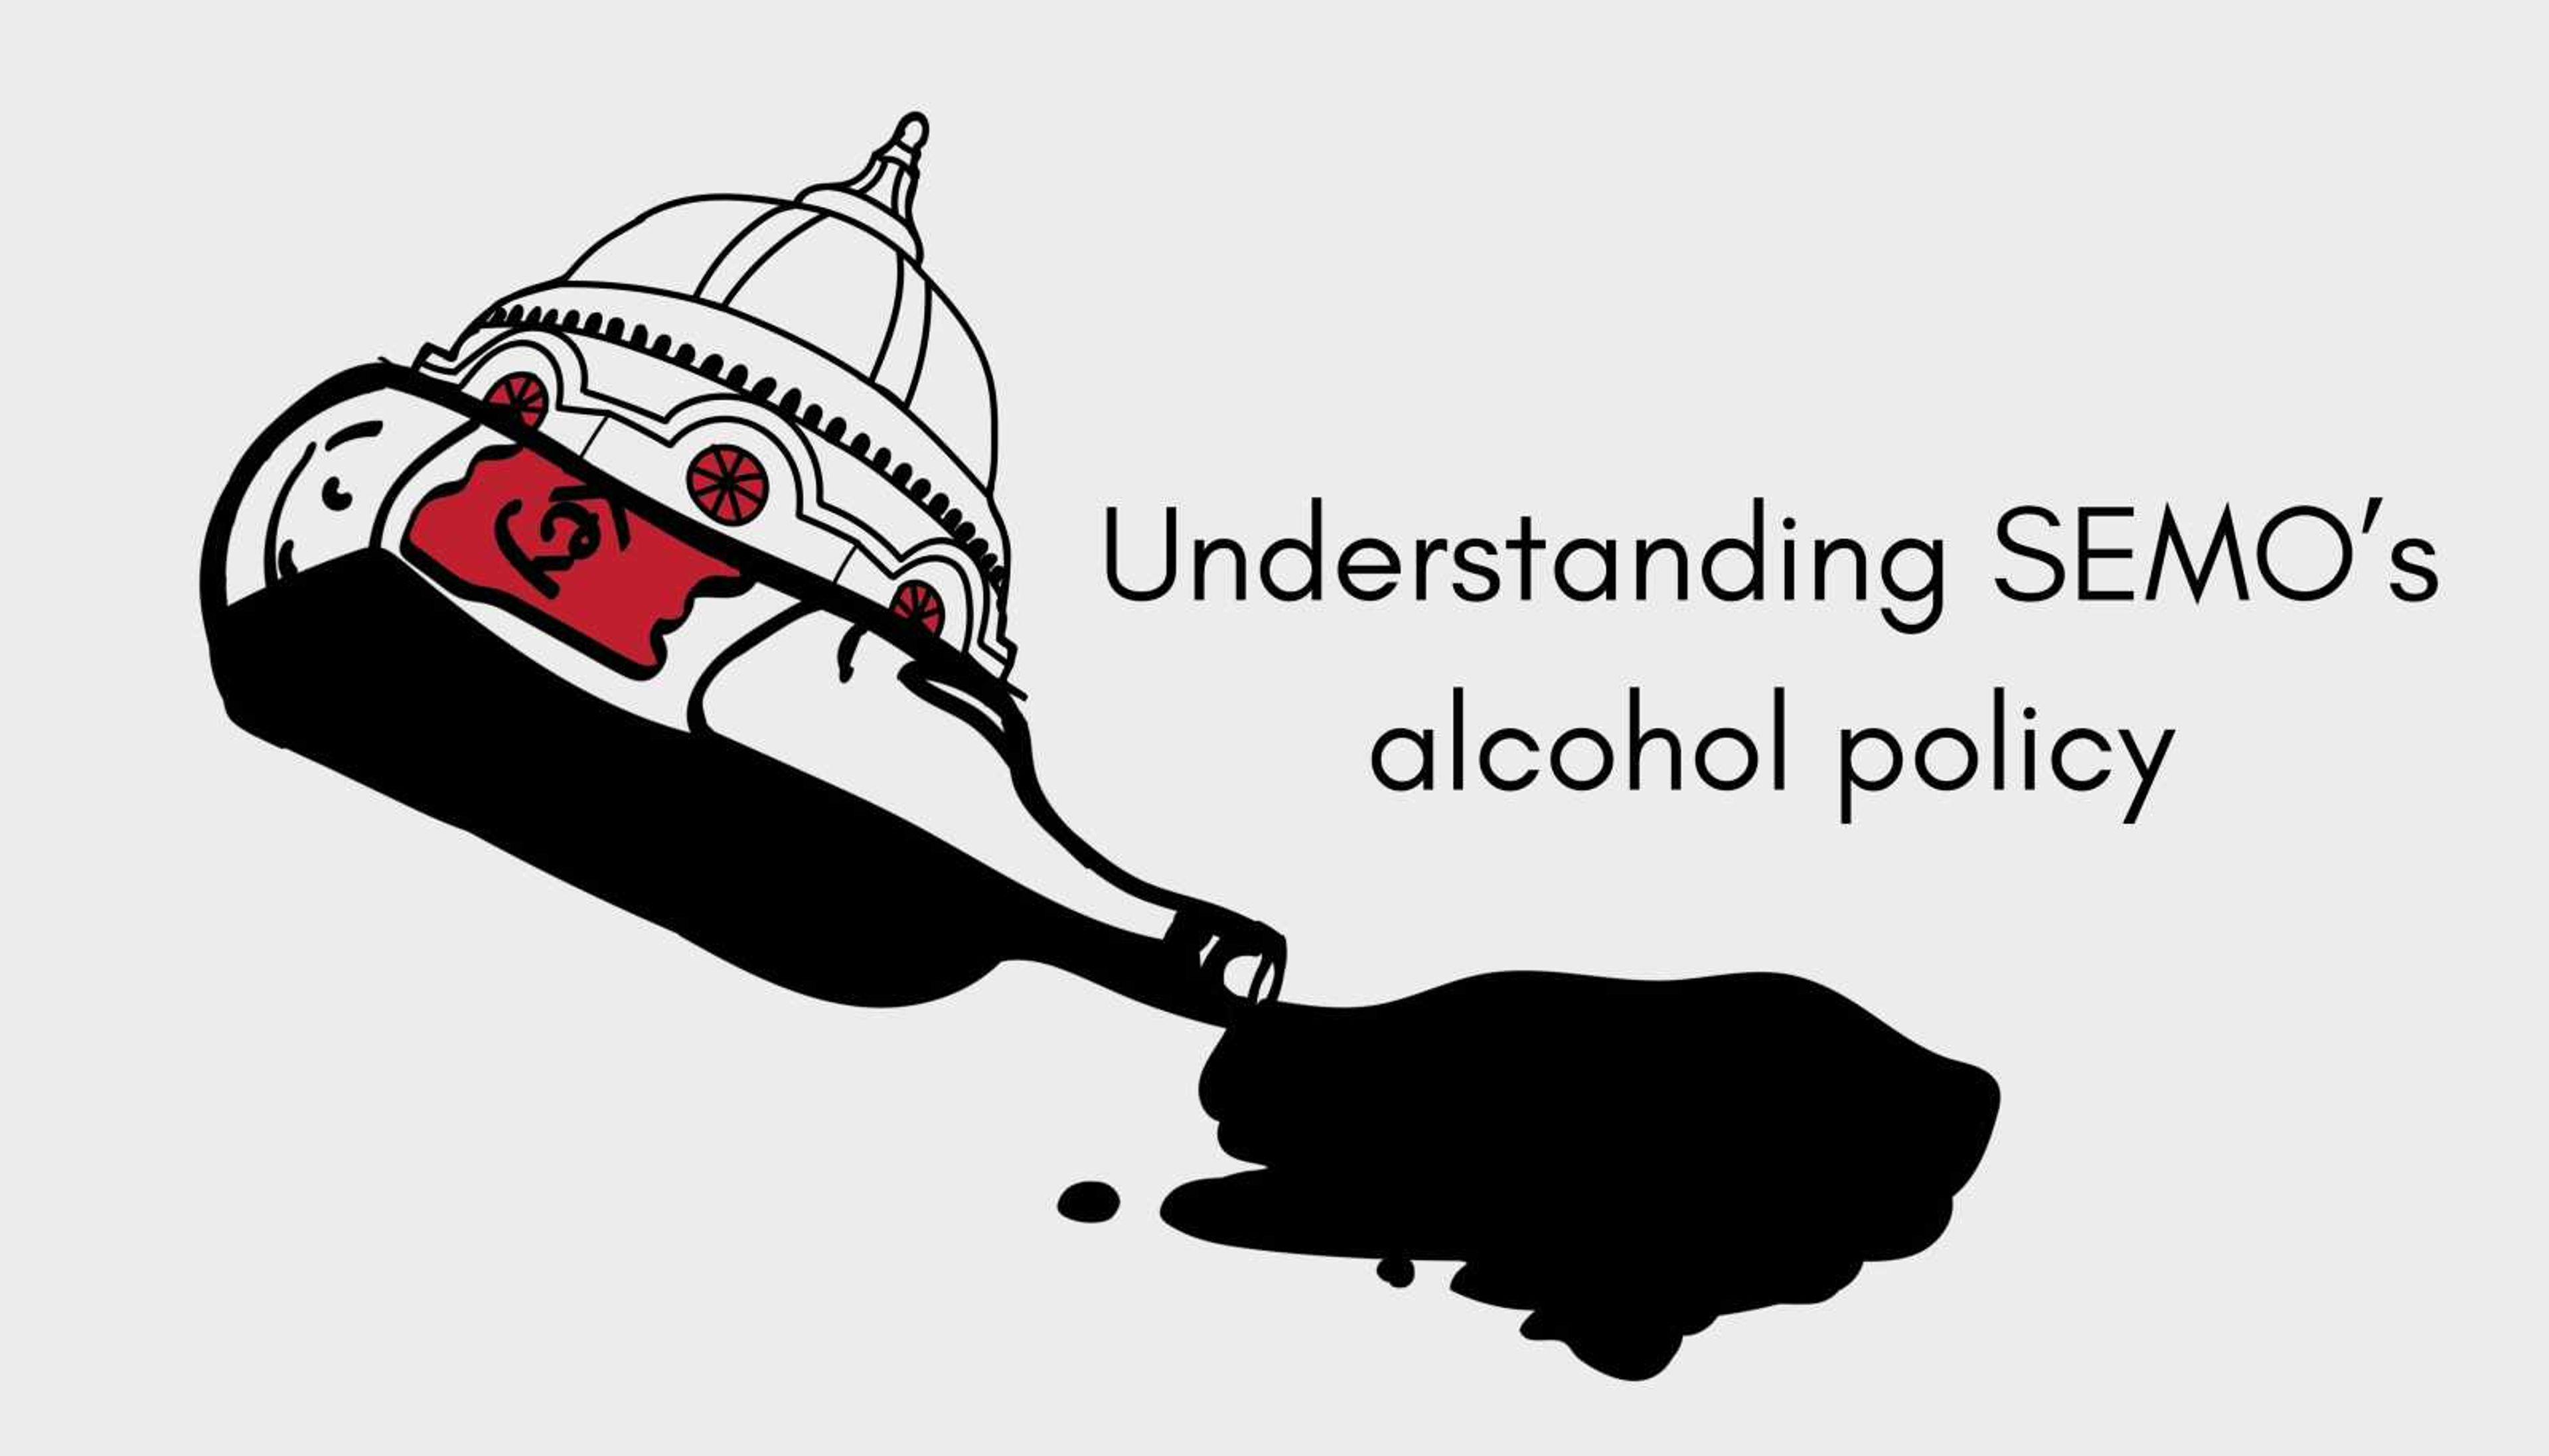 Understanding SEMO's alcohol policy, consequences